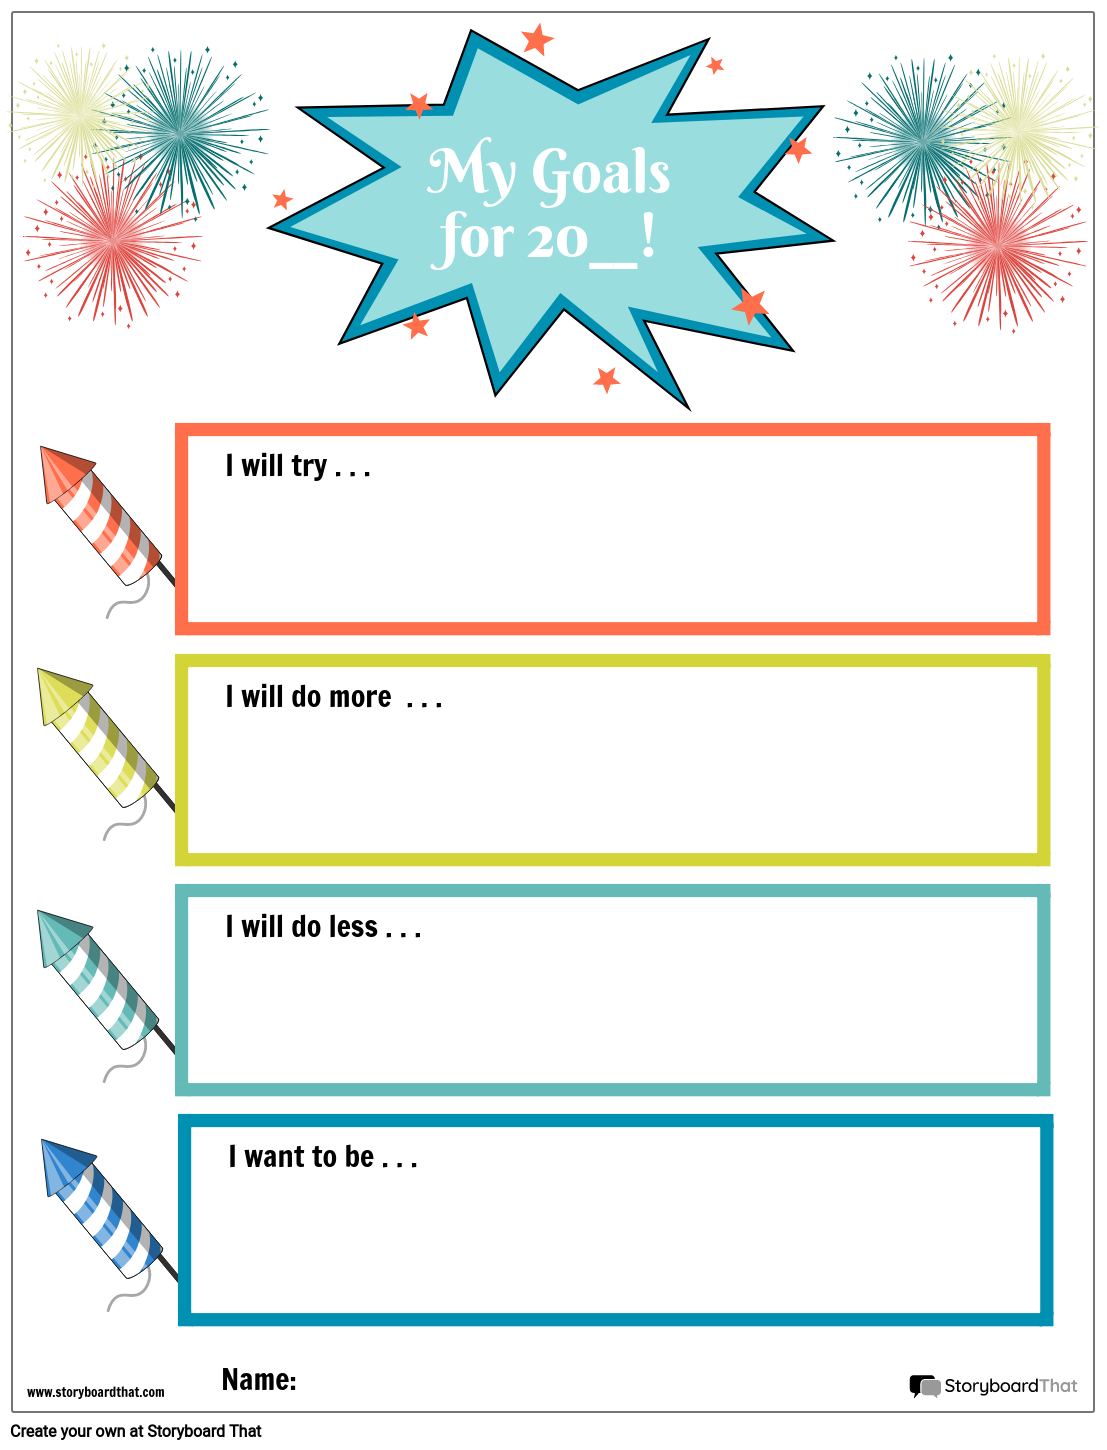 Goal Setting Template with Fireworks Theme